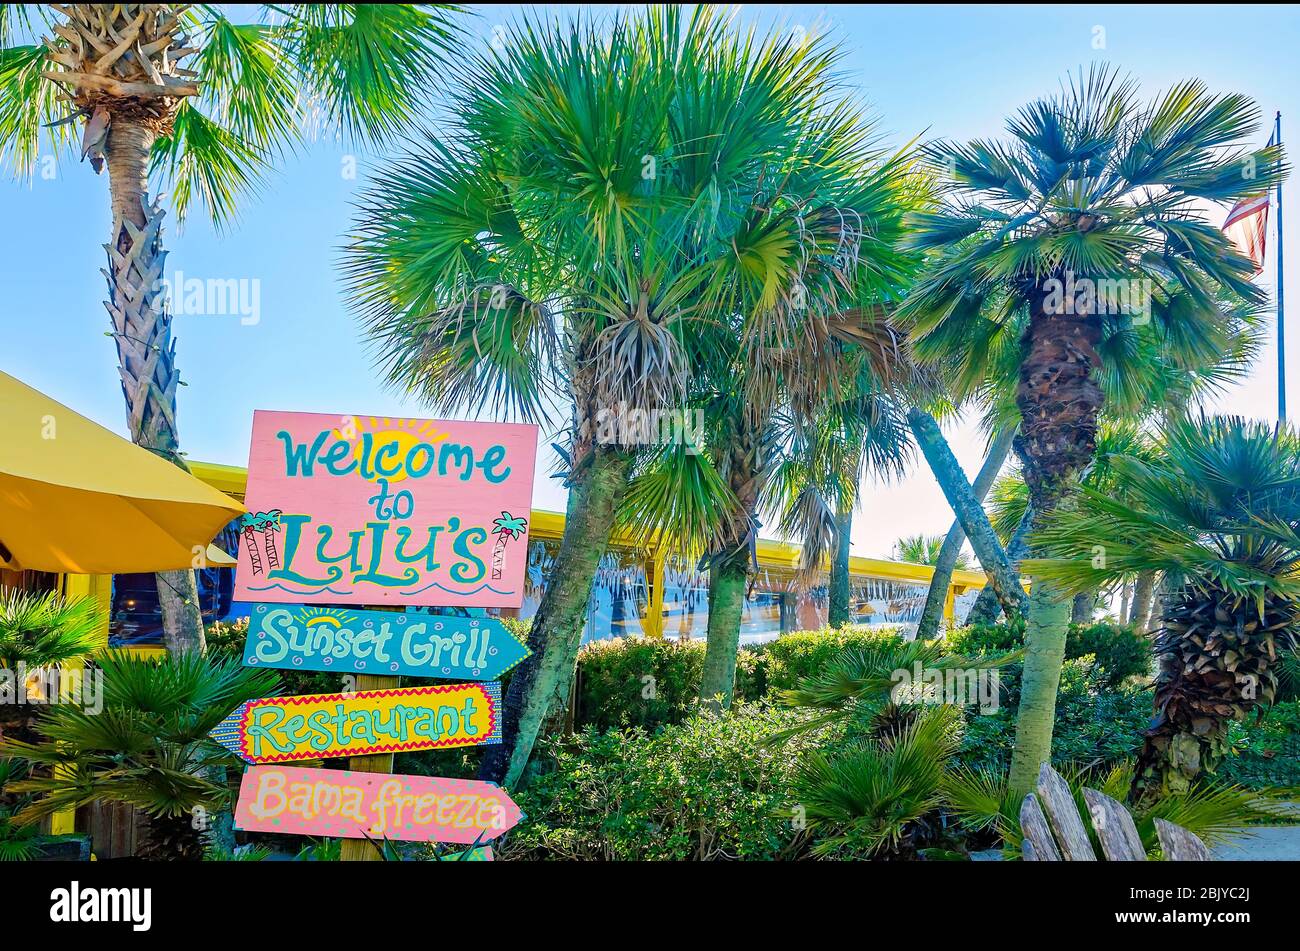 A sign welcomes tourists to Lulu’s Sunset Grill restaurant, March 4, 2016, in Gulf Shores, Alabama. Stock Photo